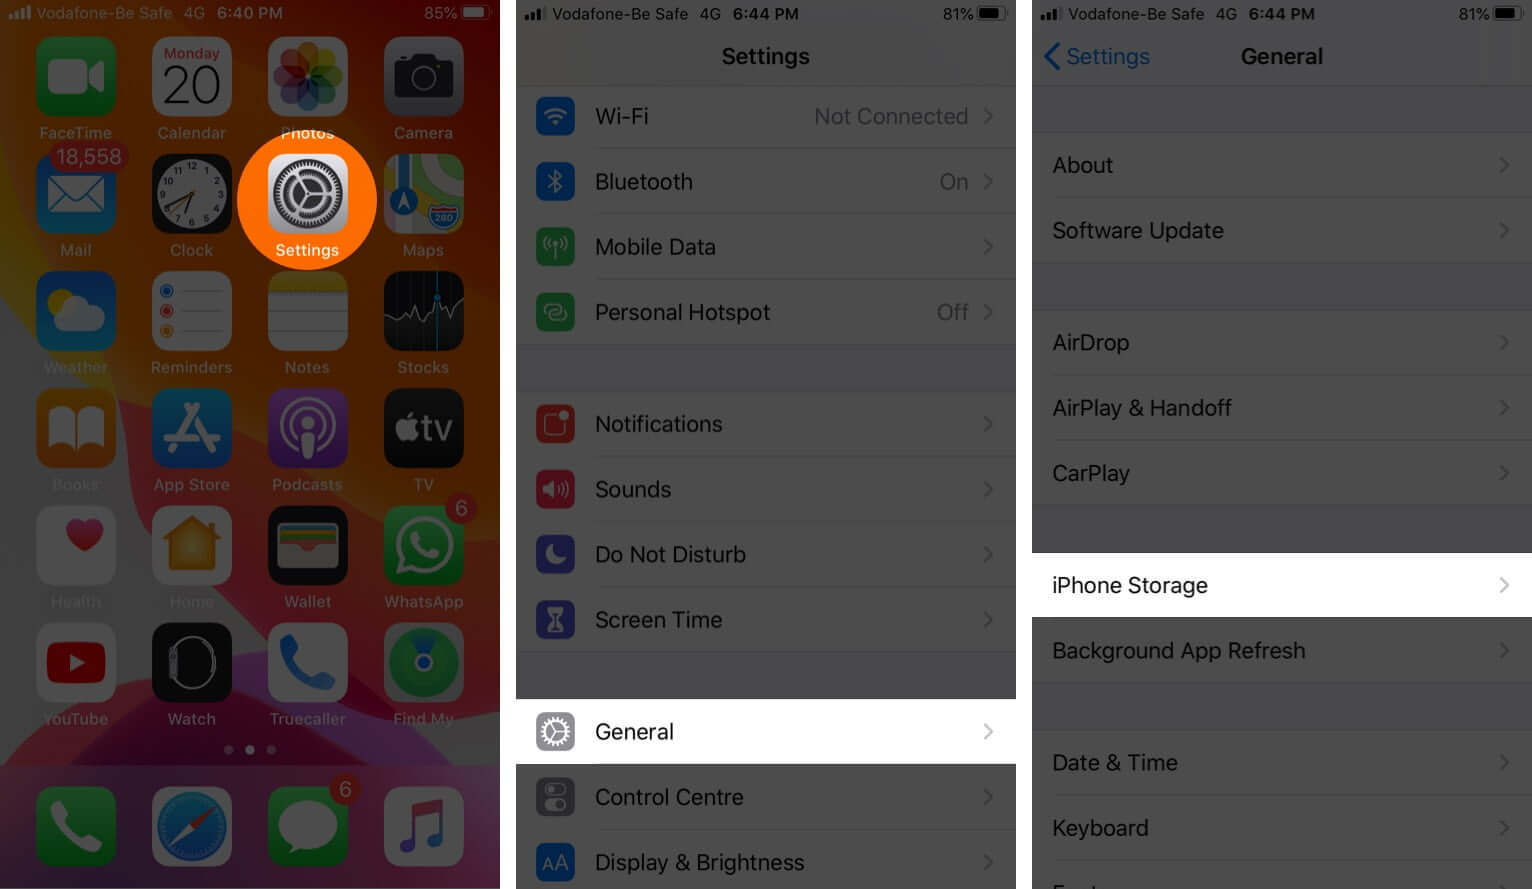 open settings tap on general and tap iphone storage